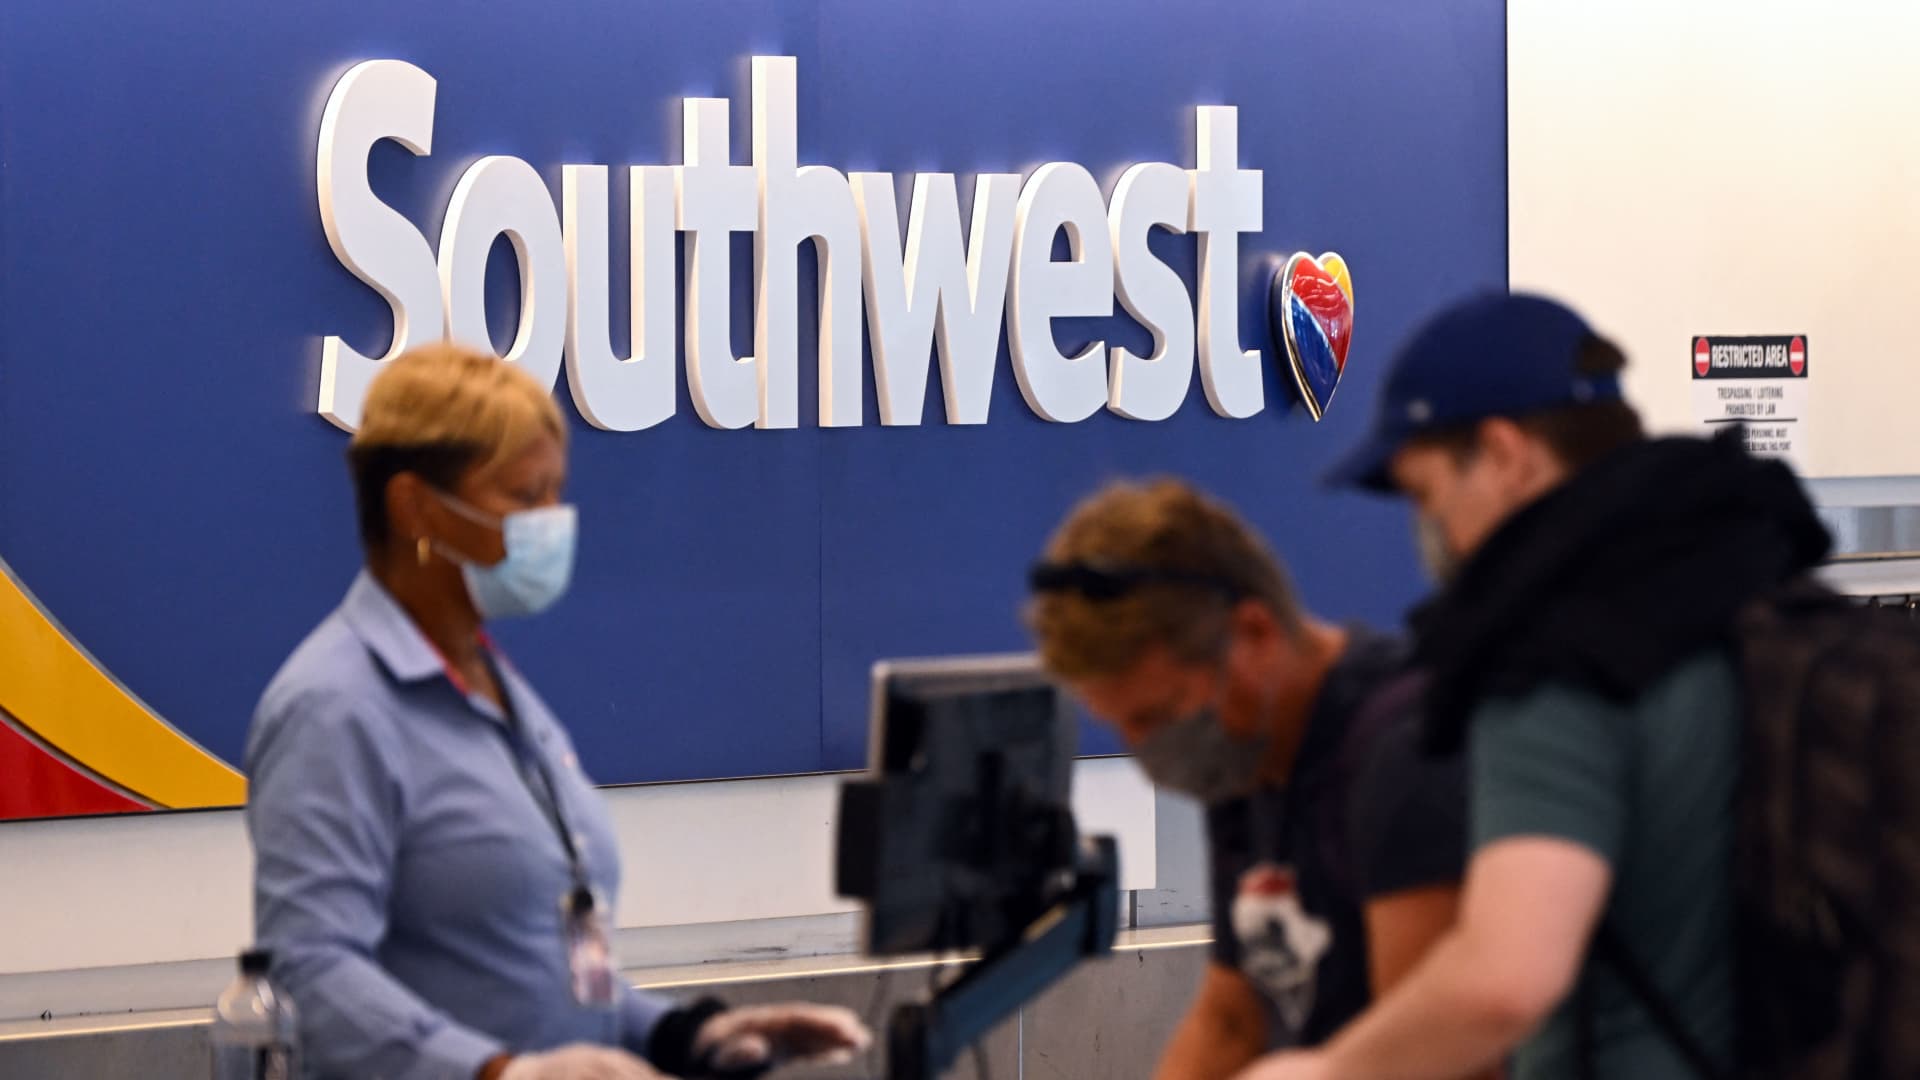 cfra-says-southwest-airlines-remains-a-strong-buy,-despite-recent-turmoil-for-travelers